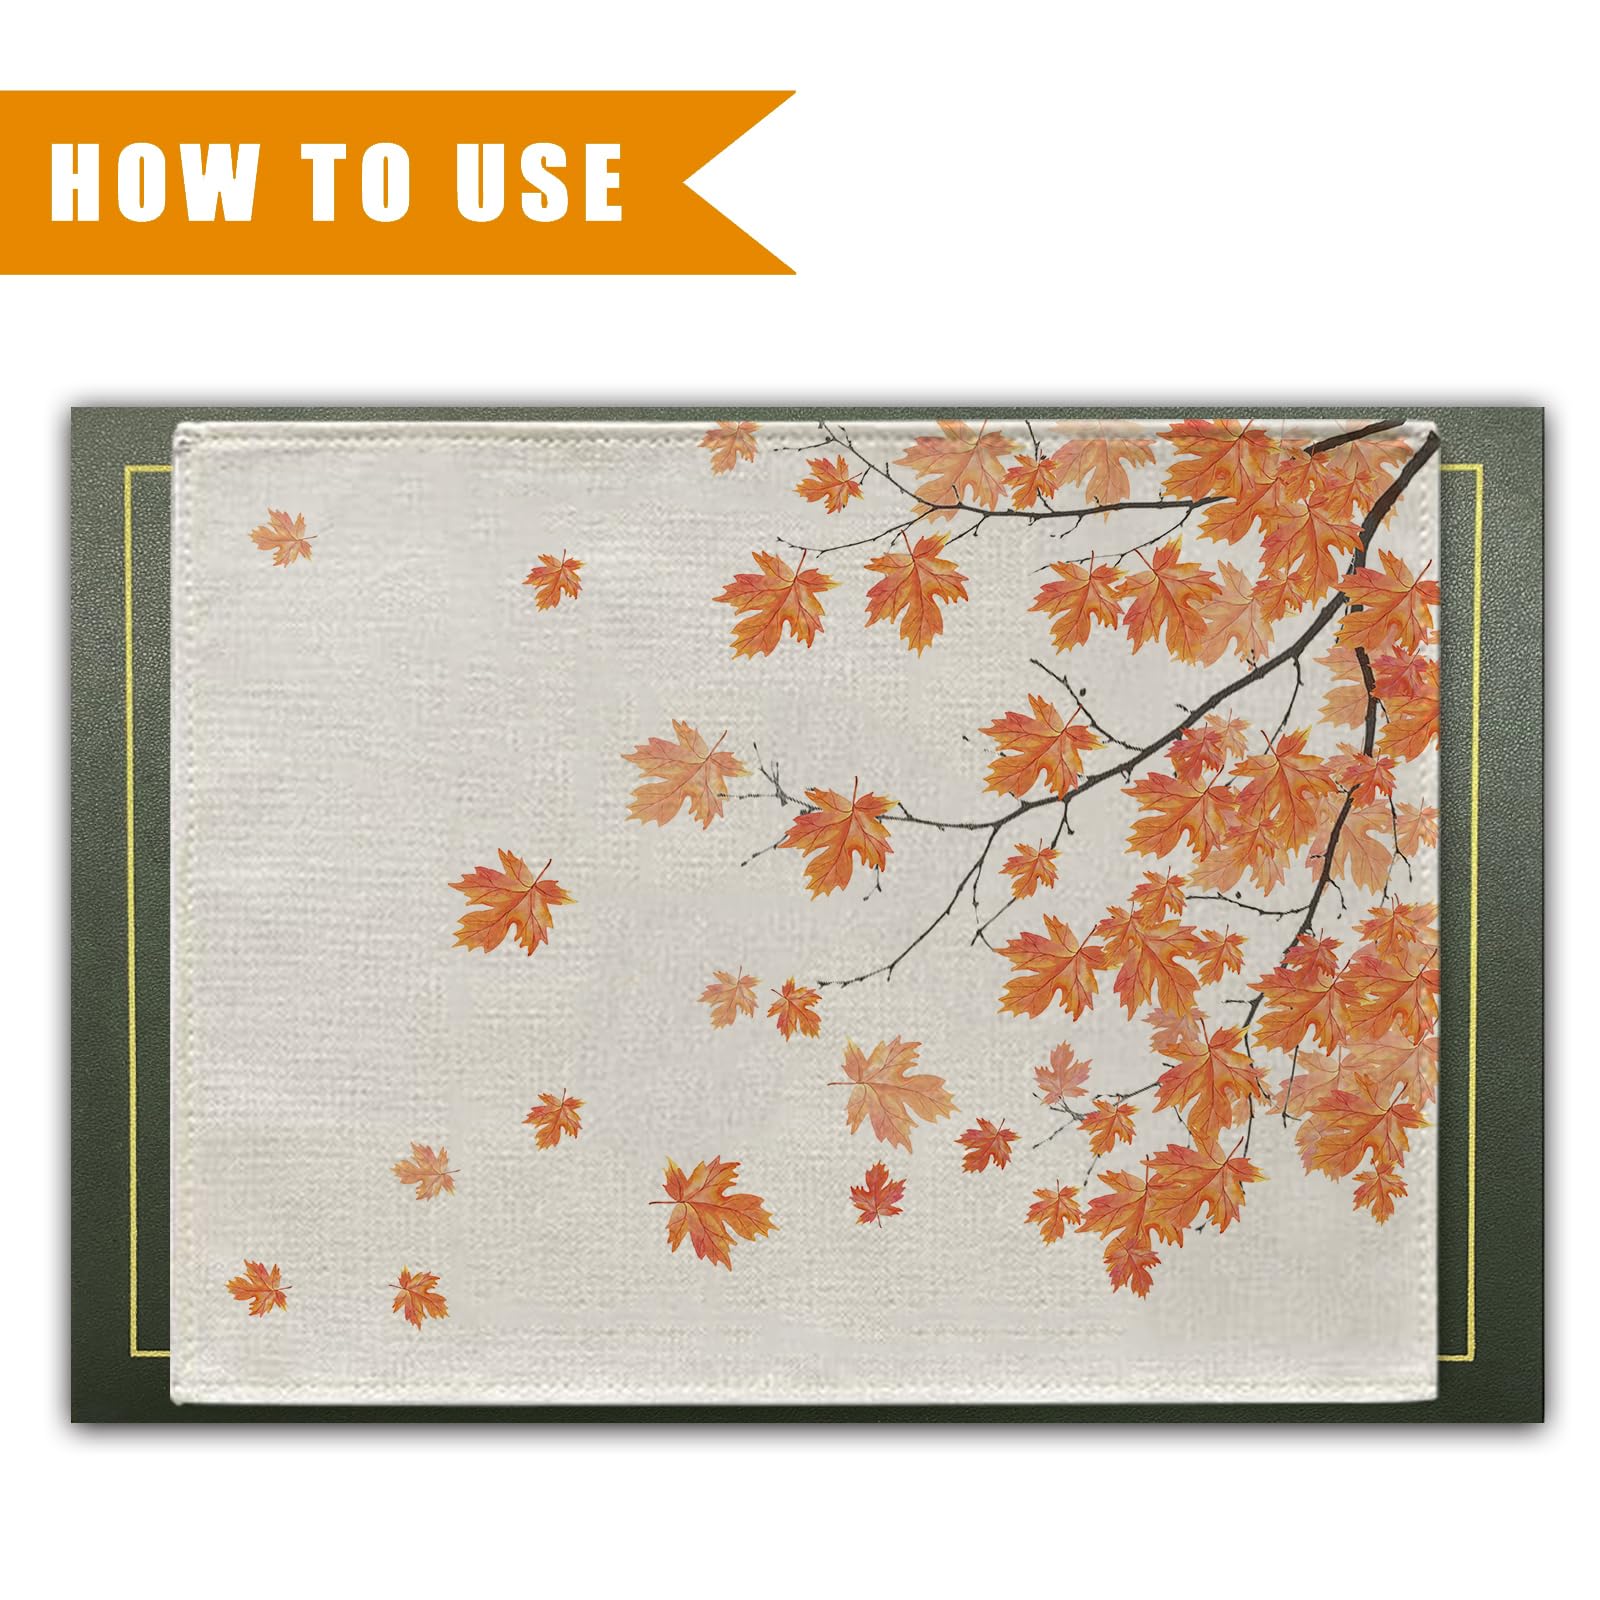 Fall Placemats Set of 4 Autumn Maple Leaves Vintage Table Mats 12 x 16 Inch Seasonal Farmhouse Kitchen Dining Table Decor